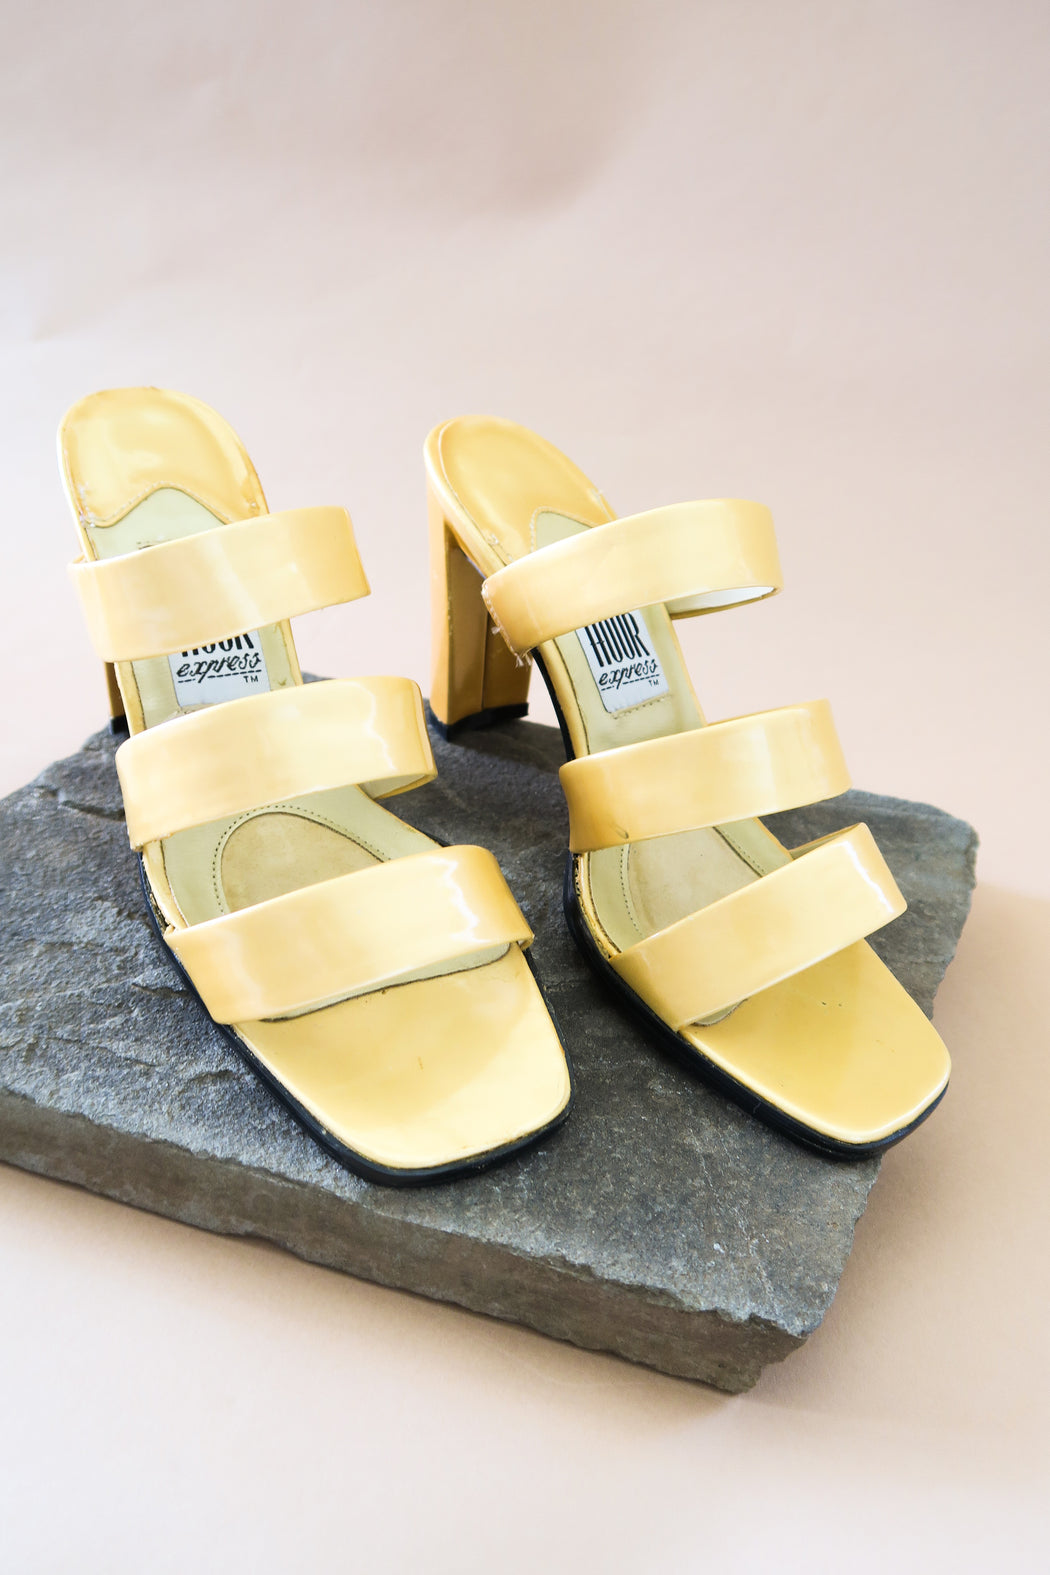 Golden Patent Leather Sandals / Size 7